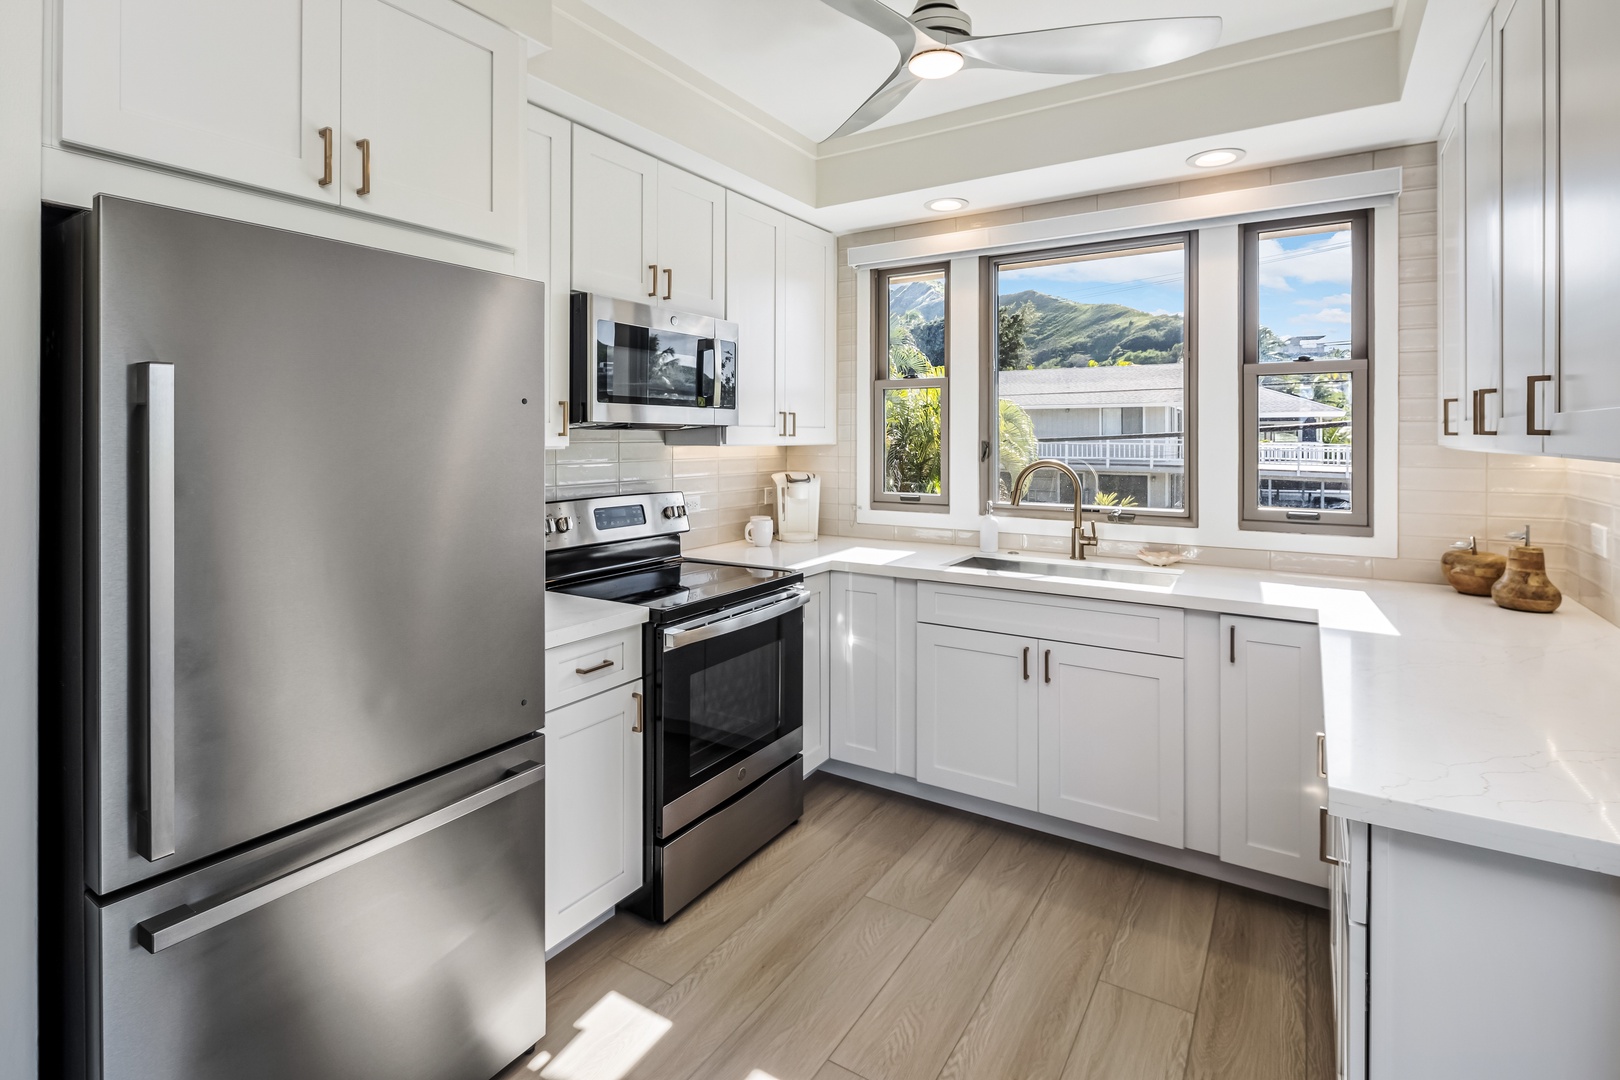 Kailua Vacation Rentals, Na Makana Villa - The cottage kitchen is also fully equipped with stainless steel appliances and has a great view